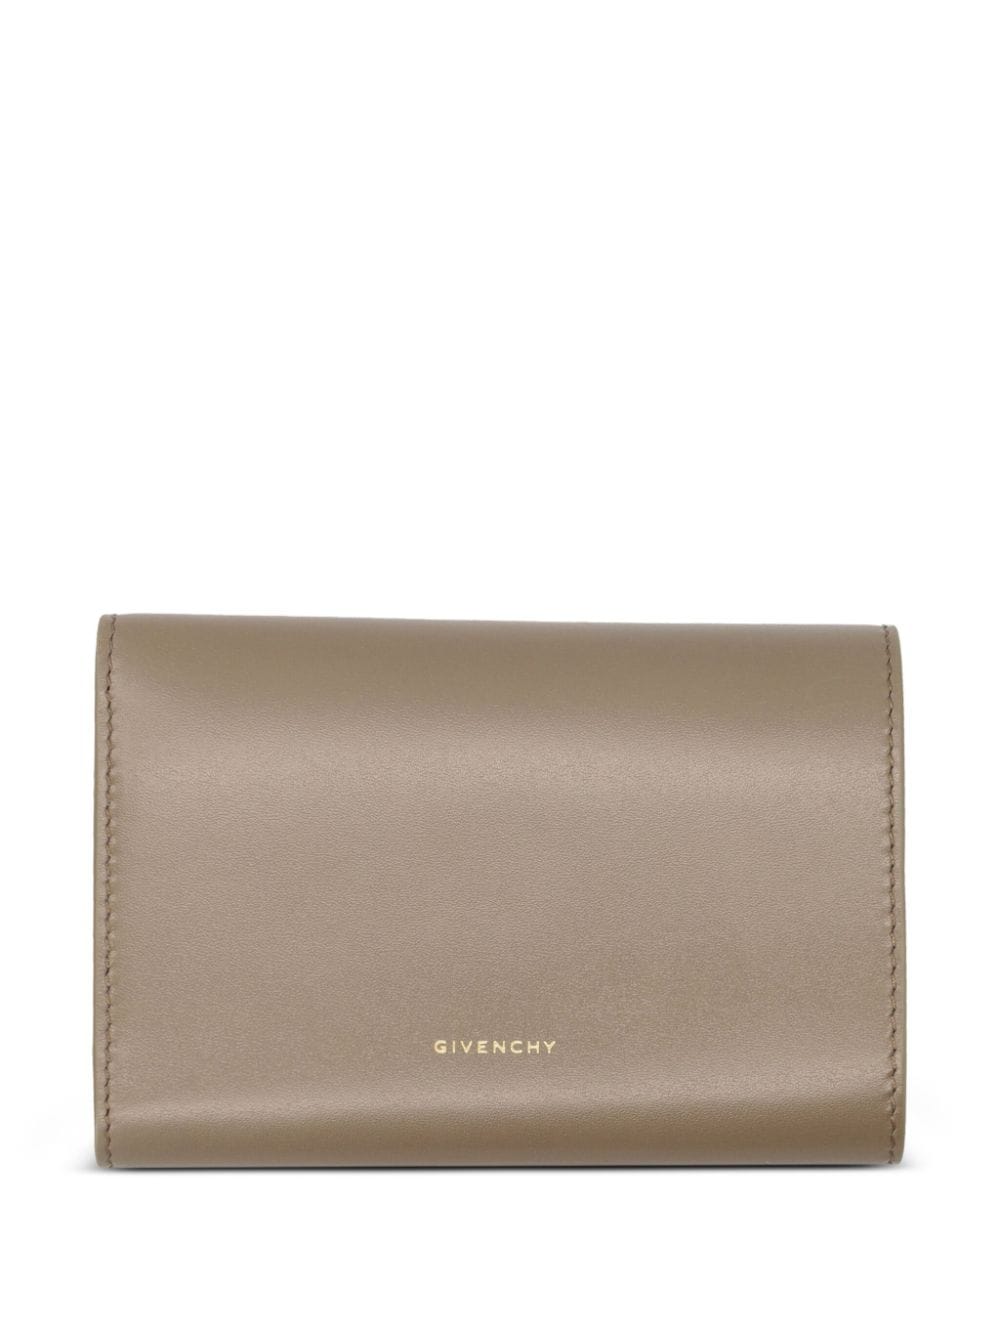 Givenchy 4G tri-fold leather wallet - Beige